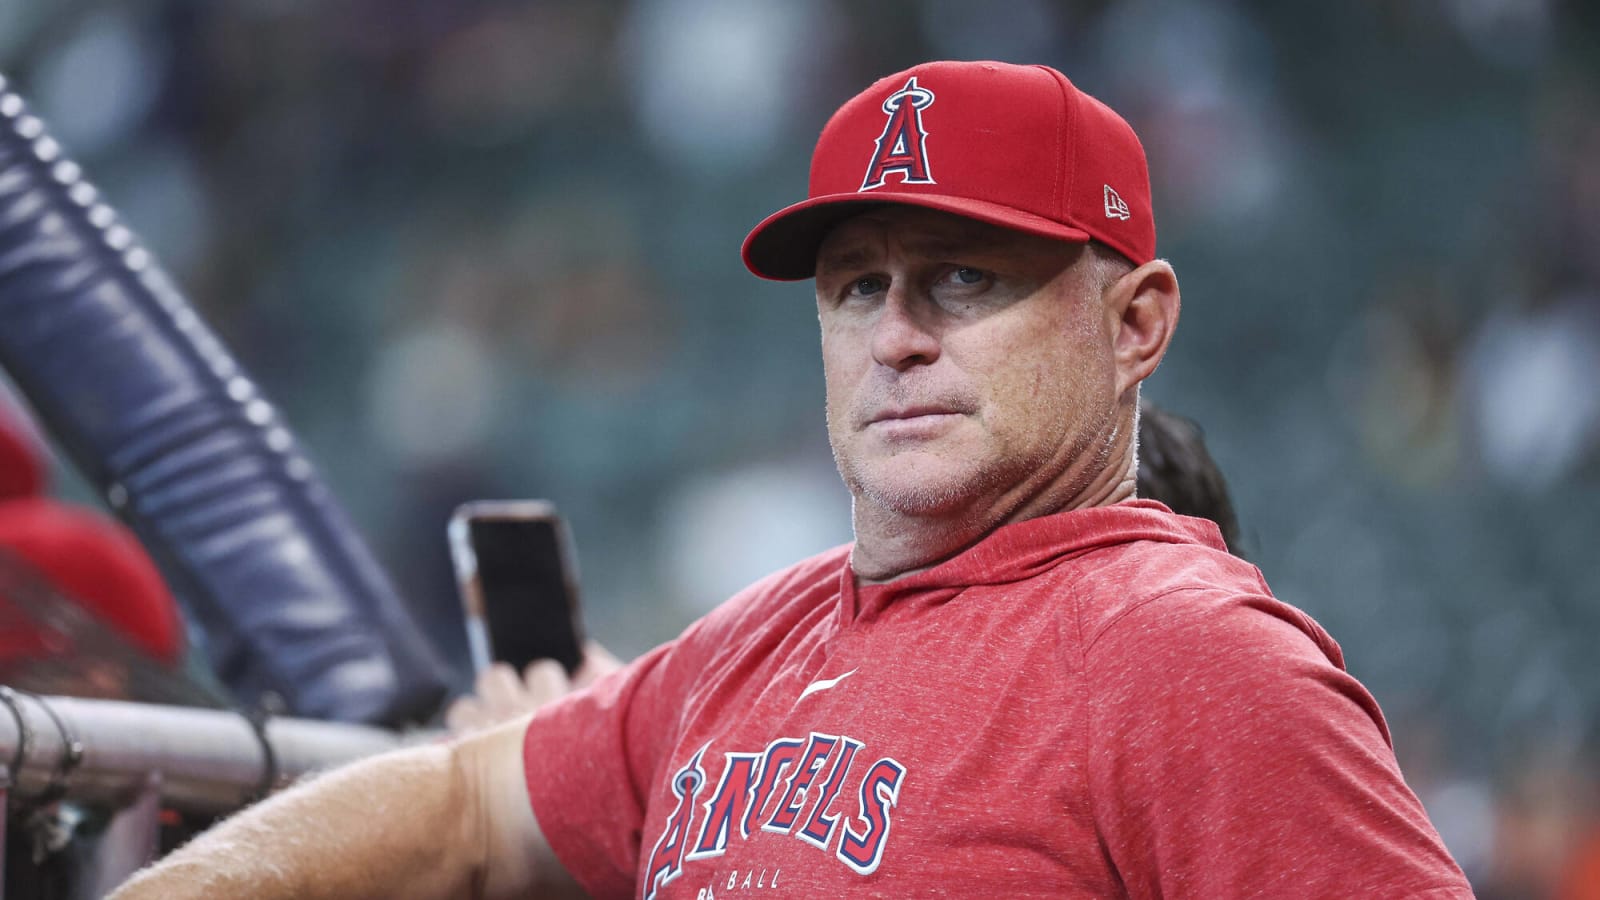 Angels Banking On ‘Long Season’ To Stay In Division Race